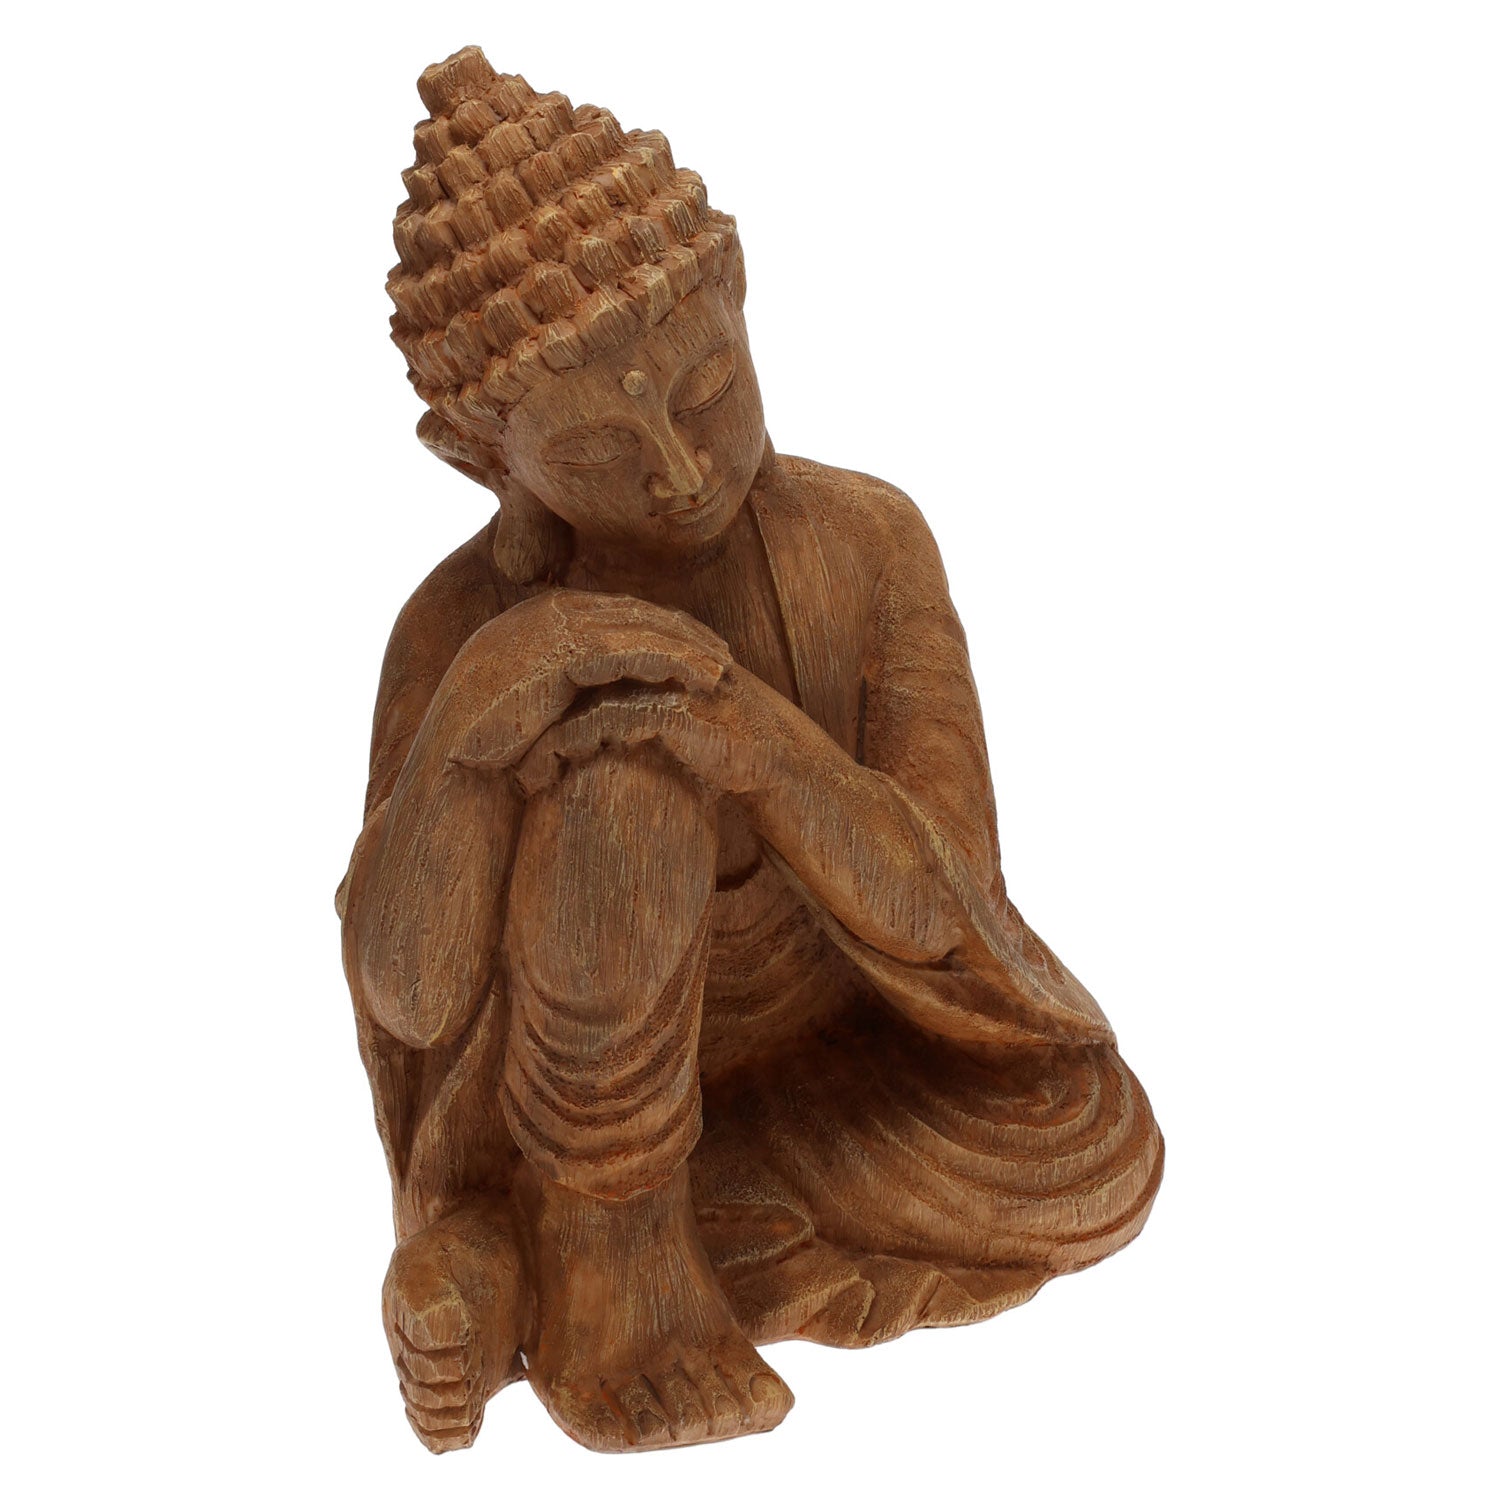 The Home Collection Buddha Sitting Polystone 1 Shaws Department Stores